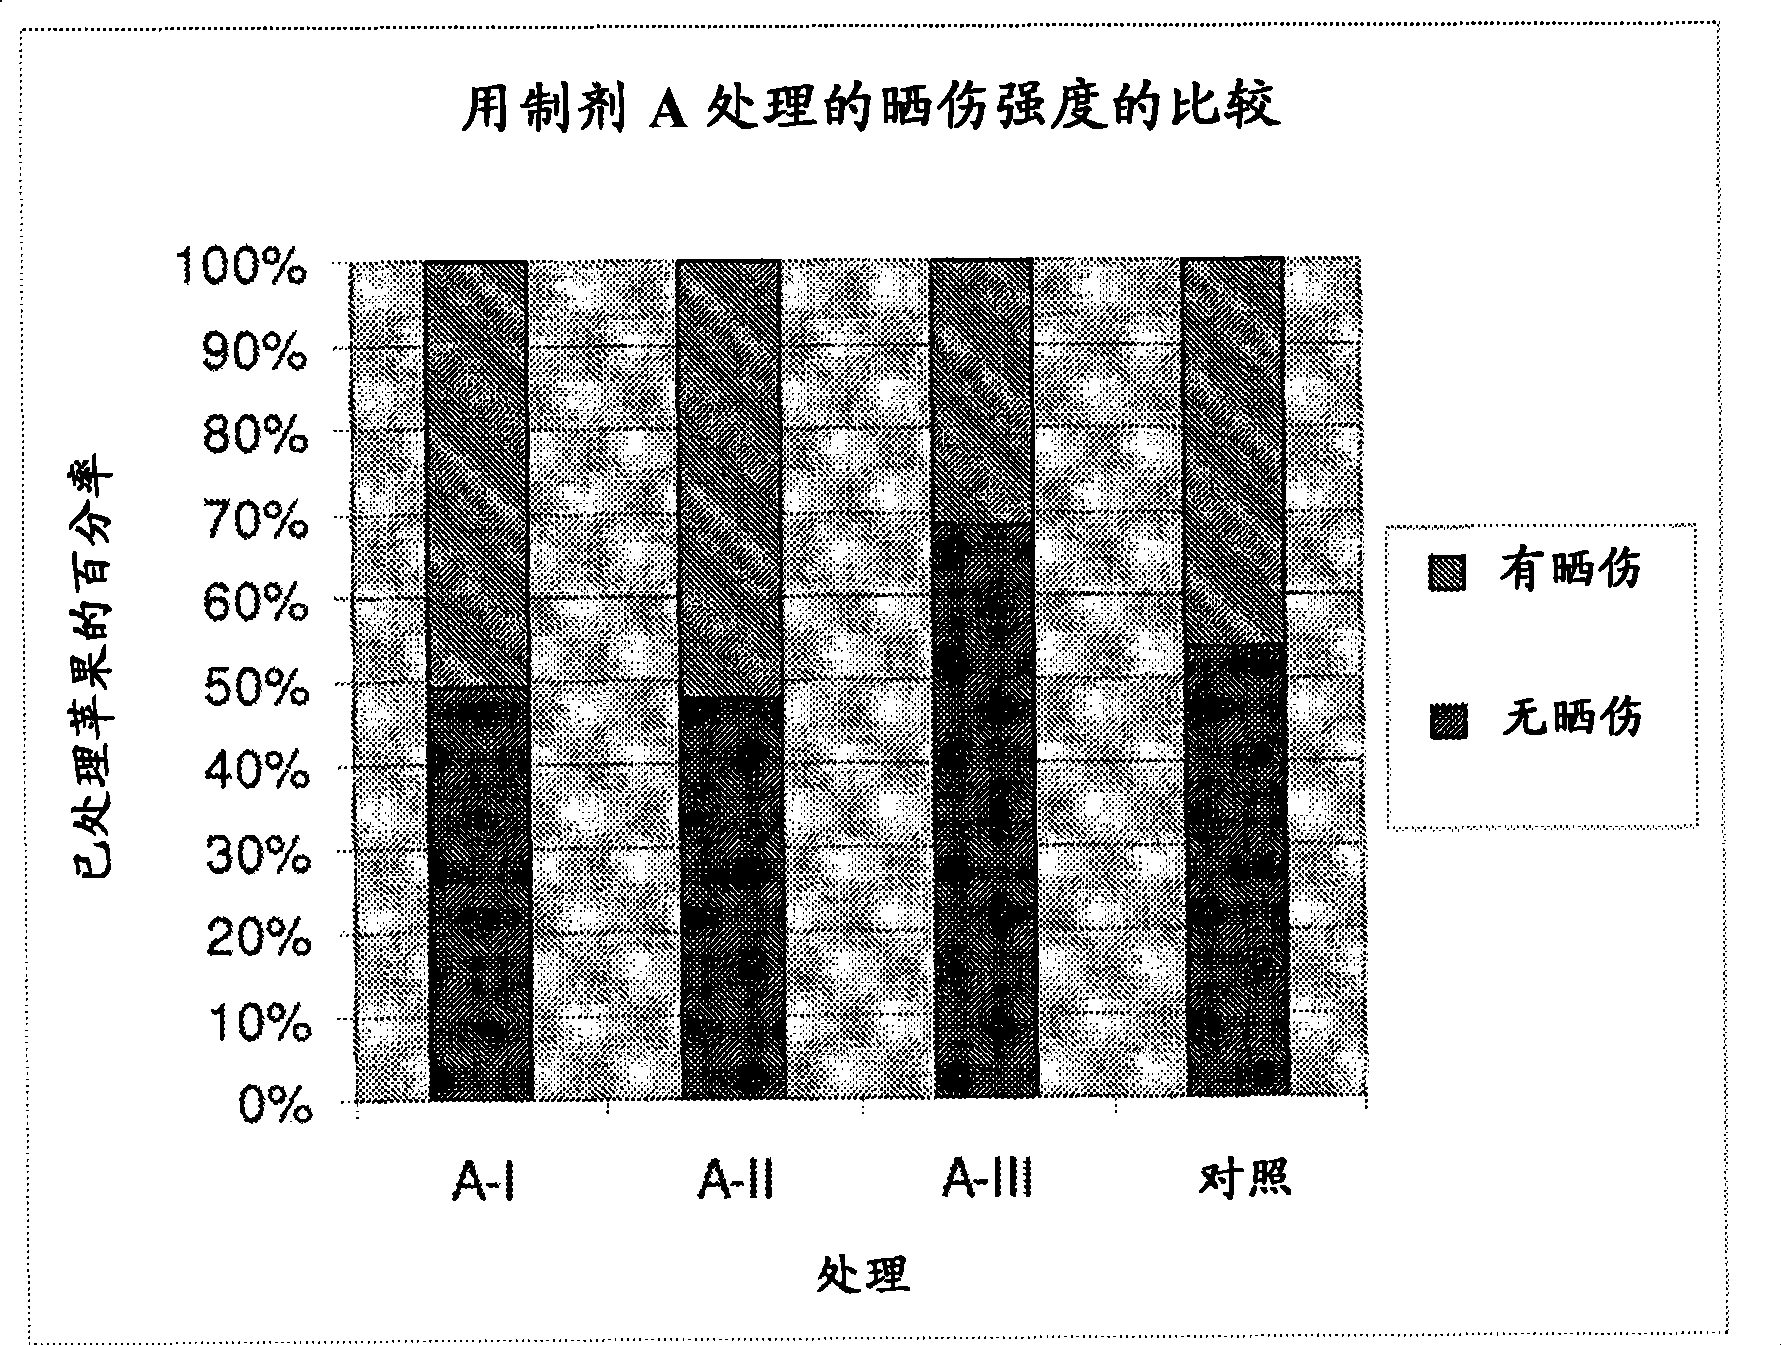 Compositions and methods to add value to plant porducts, increasing the commercial quality, resistance to external factors and polyphenol content thereof